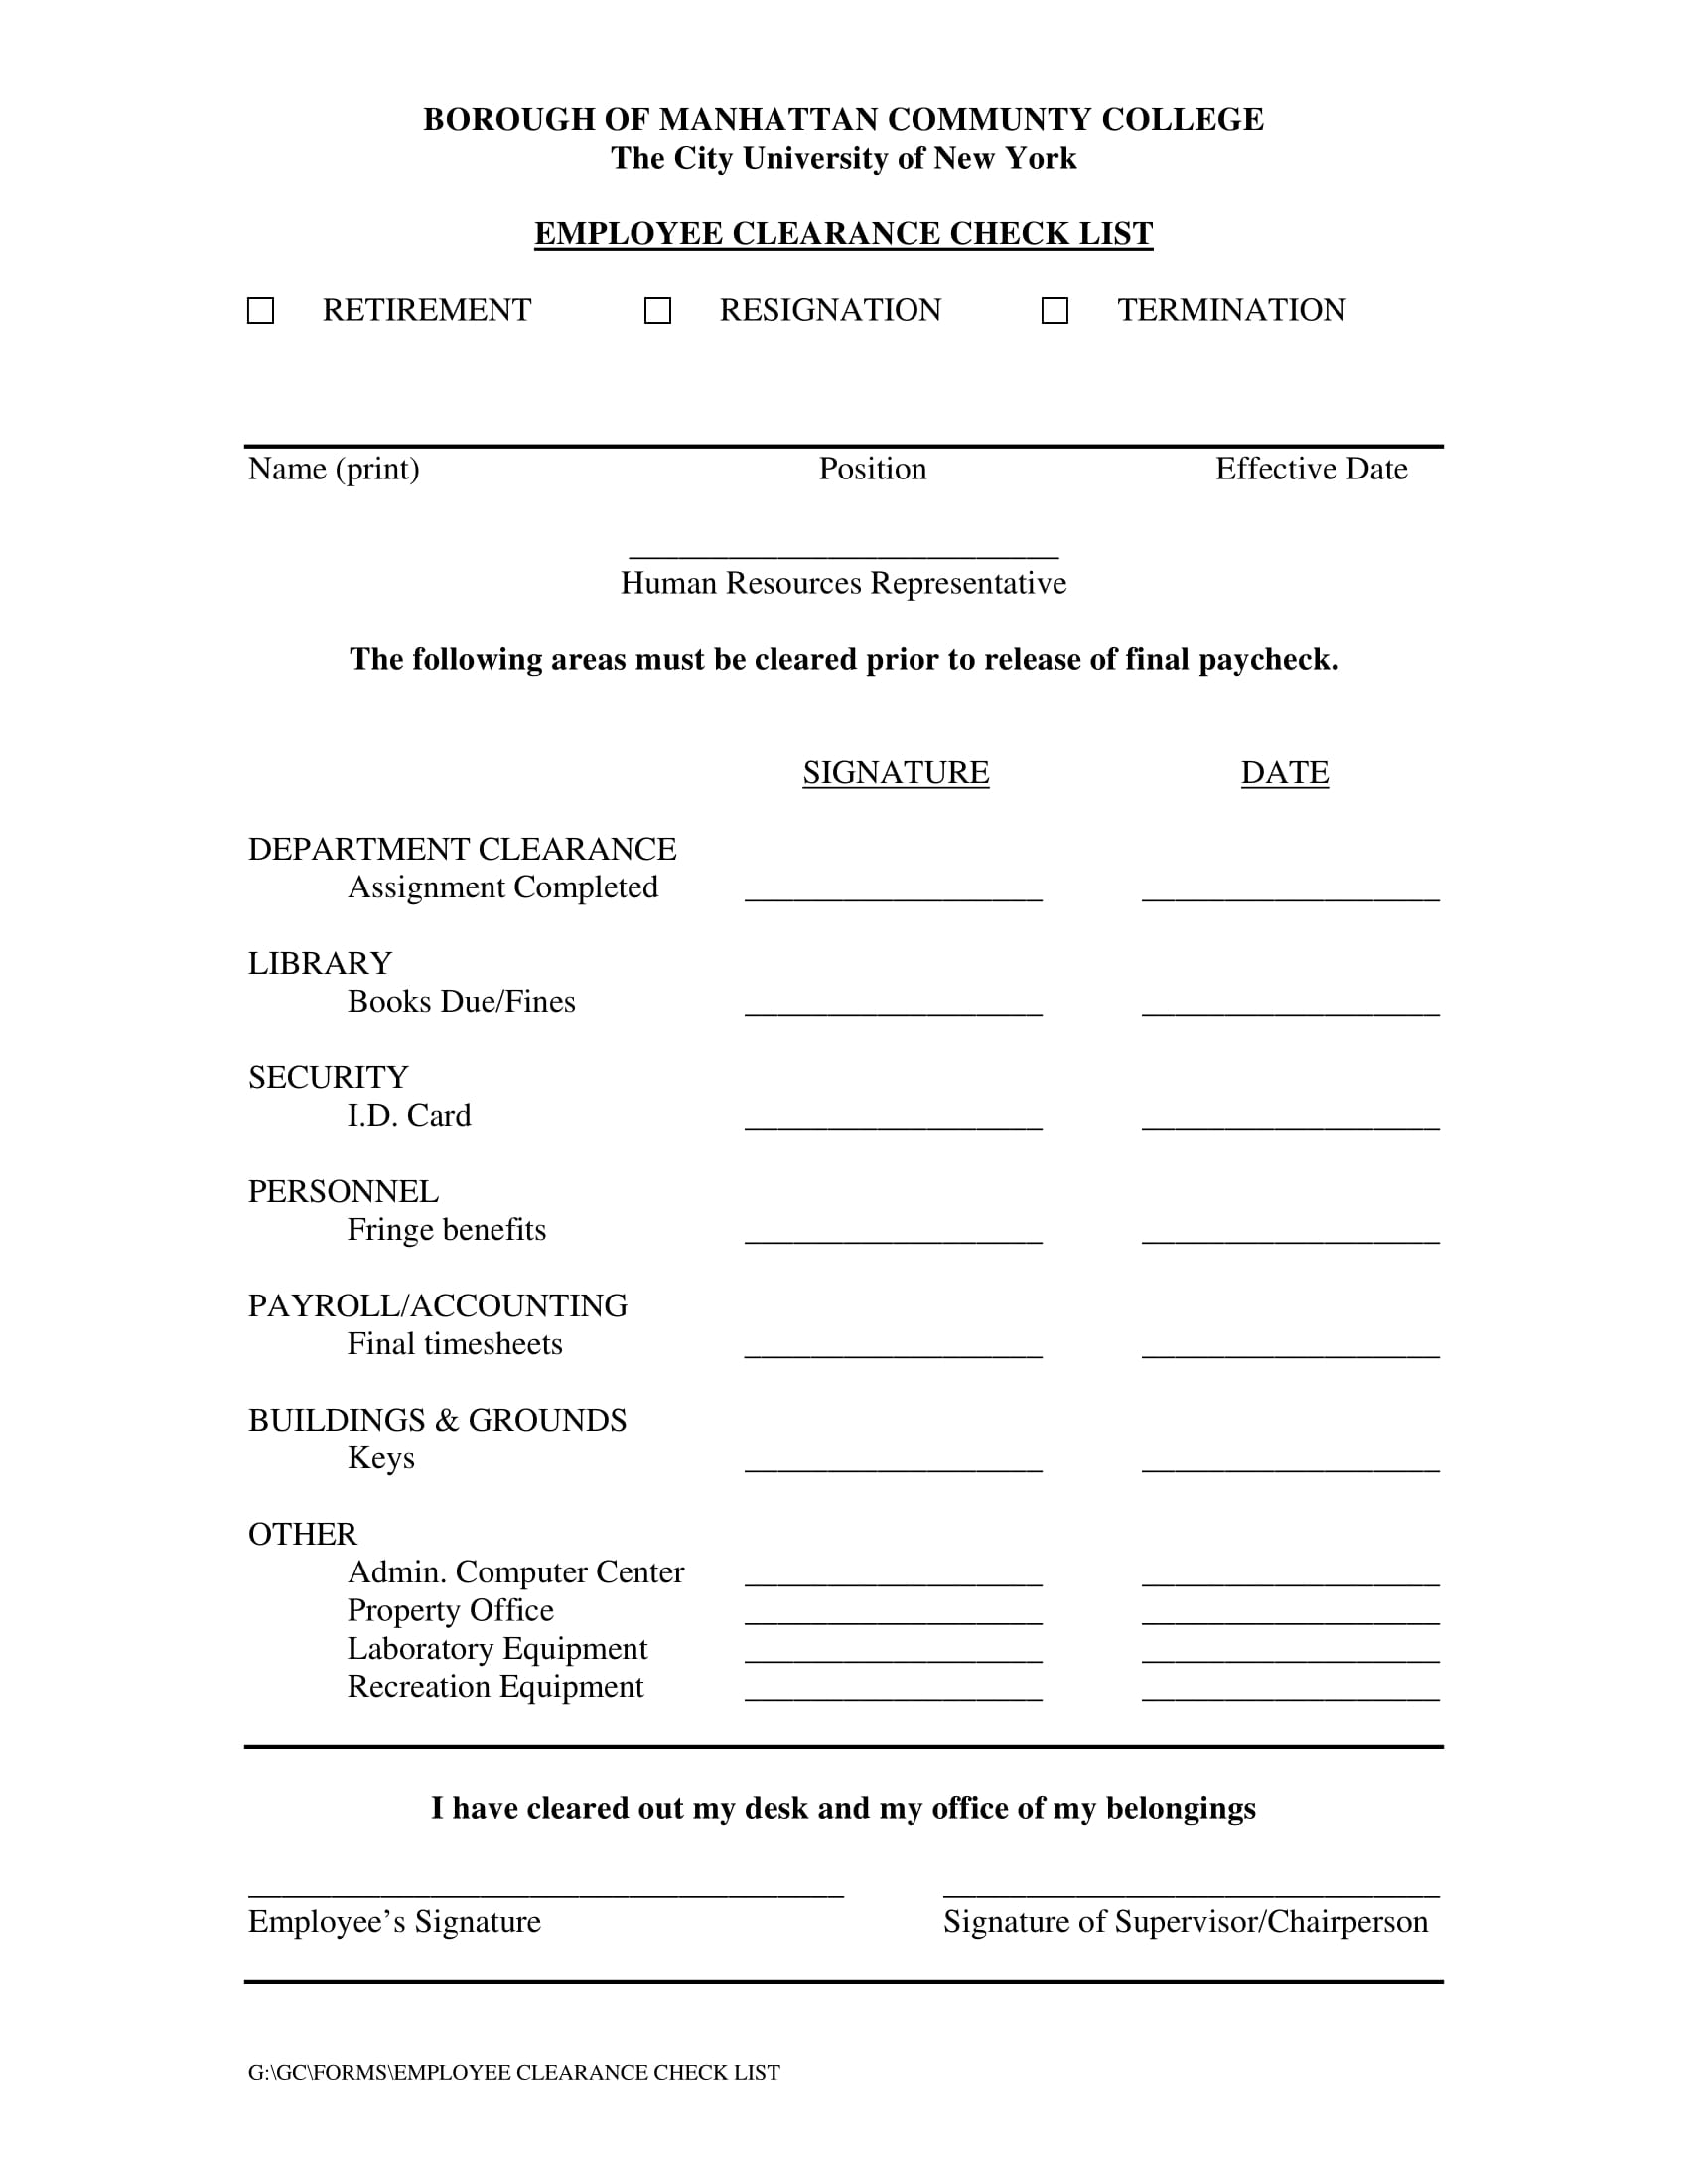 employee clearance and exit interview form 1